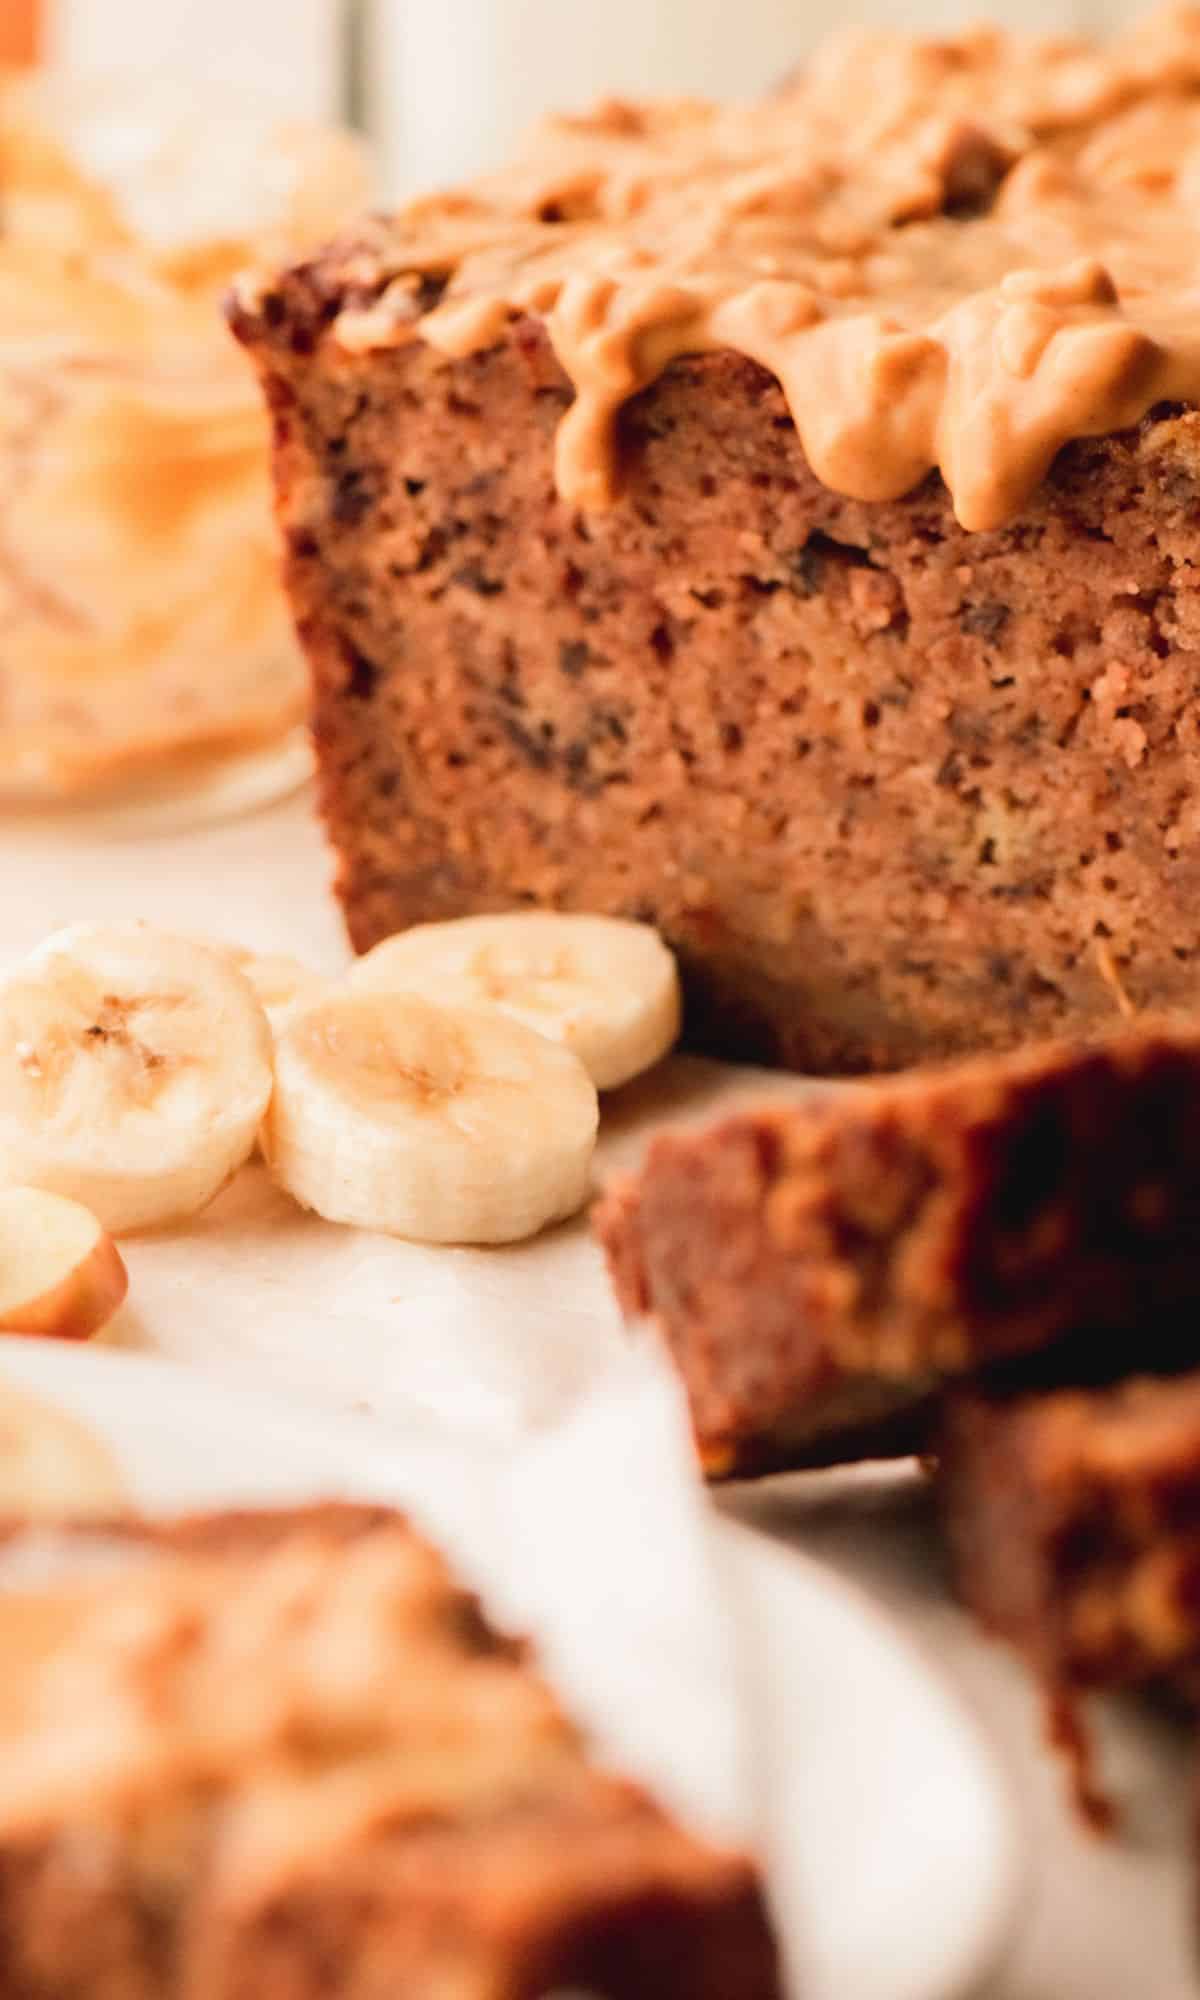 Apple banana bread topped with peanut butter.